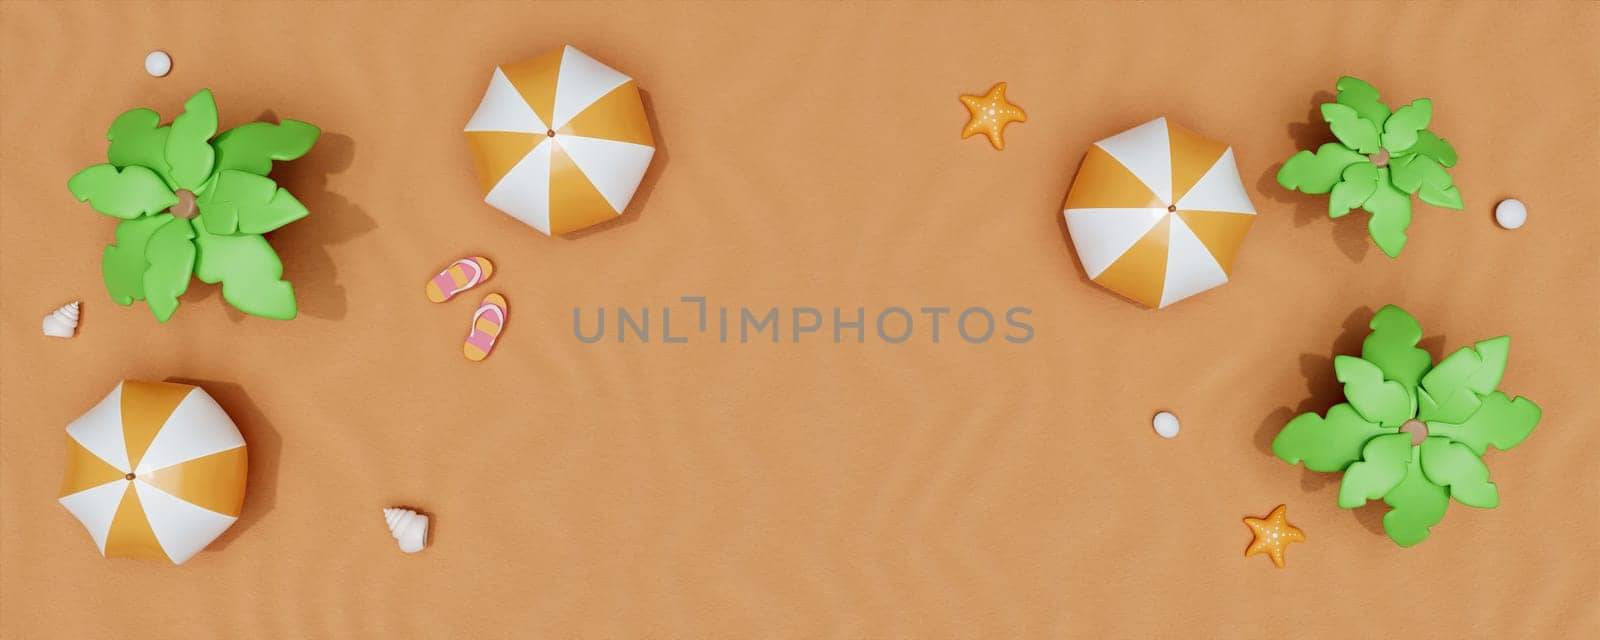 3d render top view. summer beach scene and palm leaves, umbrella. Summer time season background. by meepiangraphic